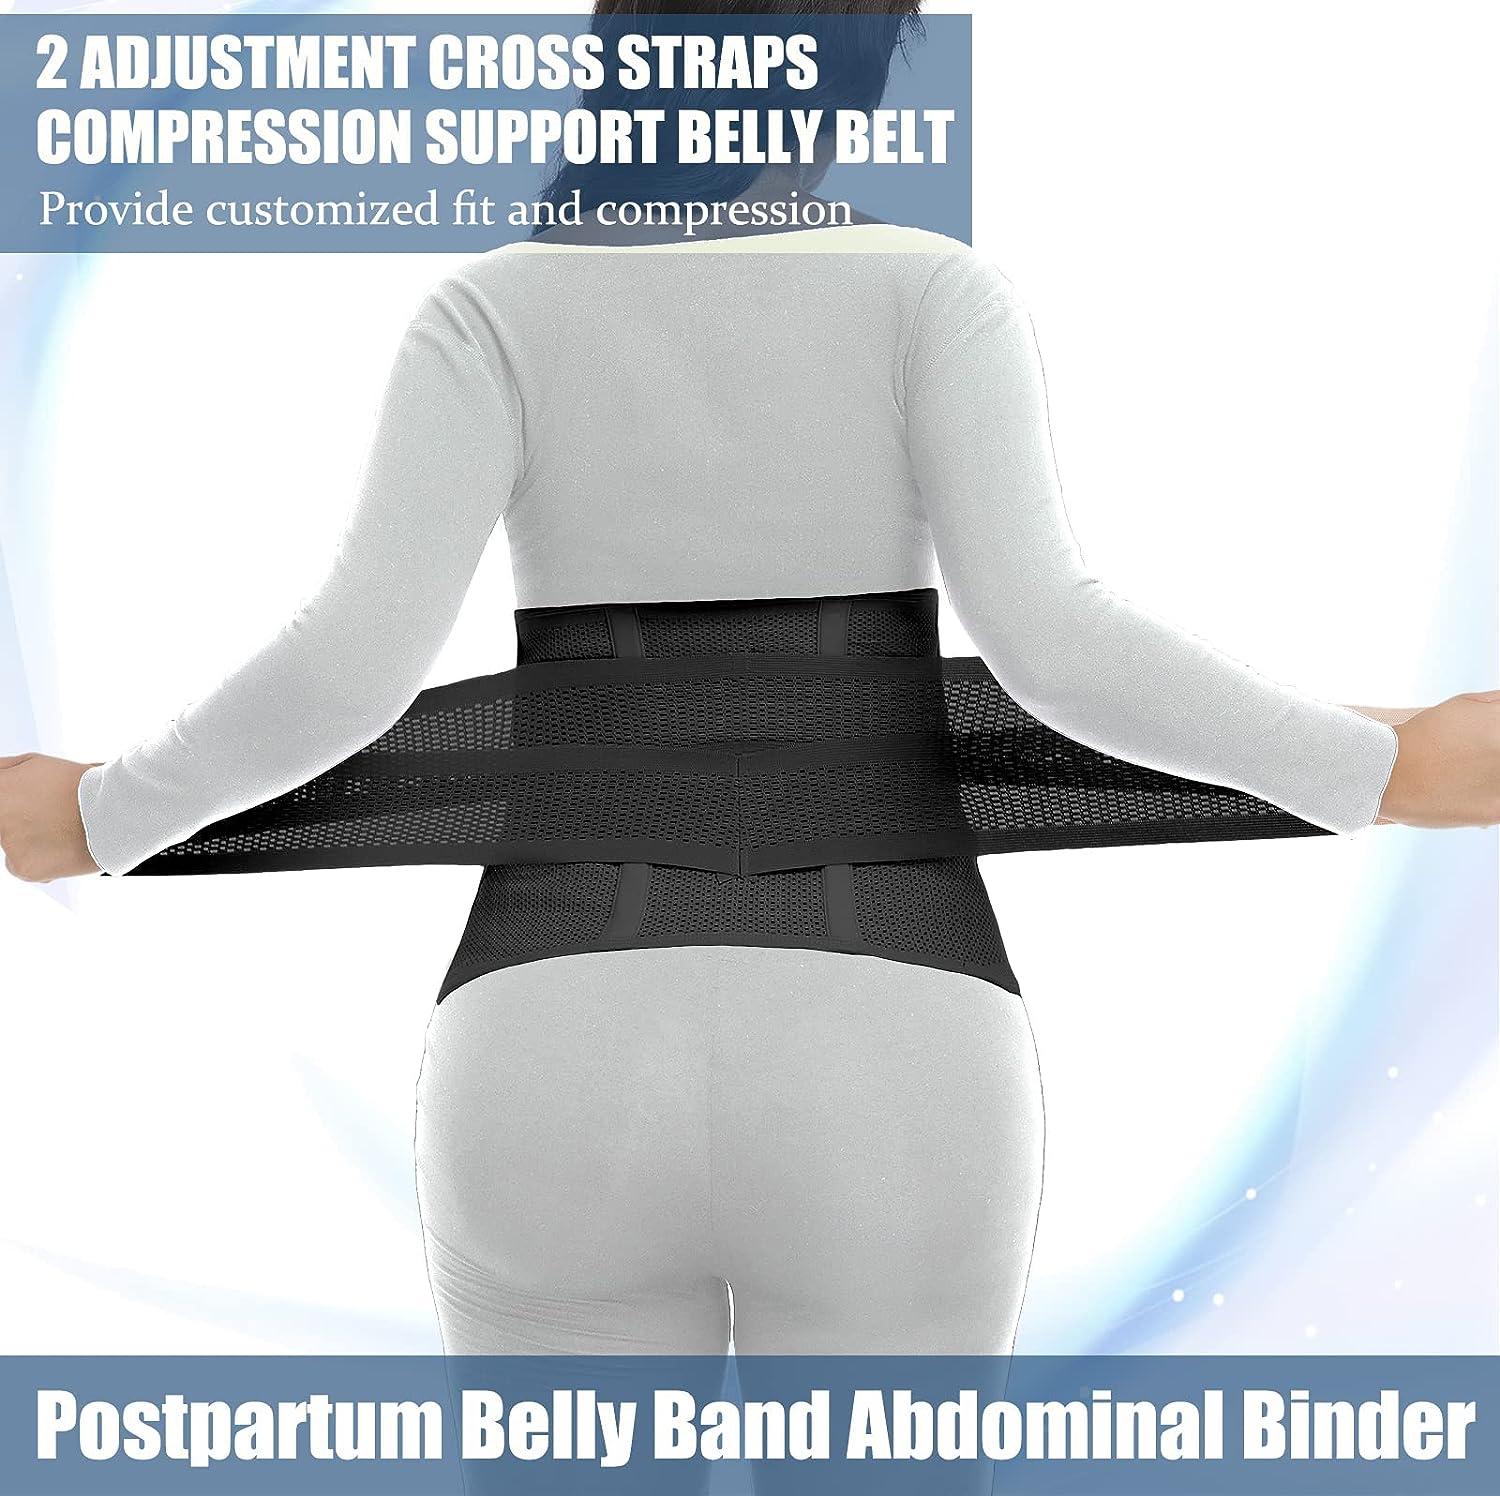 Postpartum Belly Band & Abdominal Binder Post Surgery Compression Wrap  Recovery Support Belt (for Waistline 32-38,L, Black) For waistline  32-38,L Black